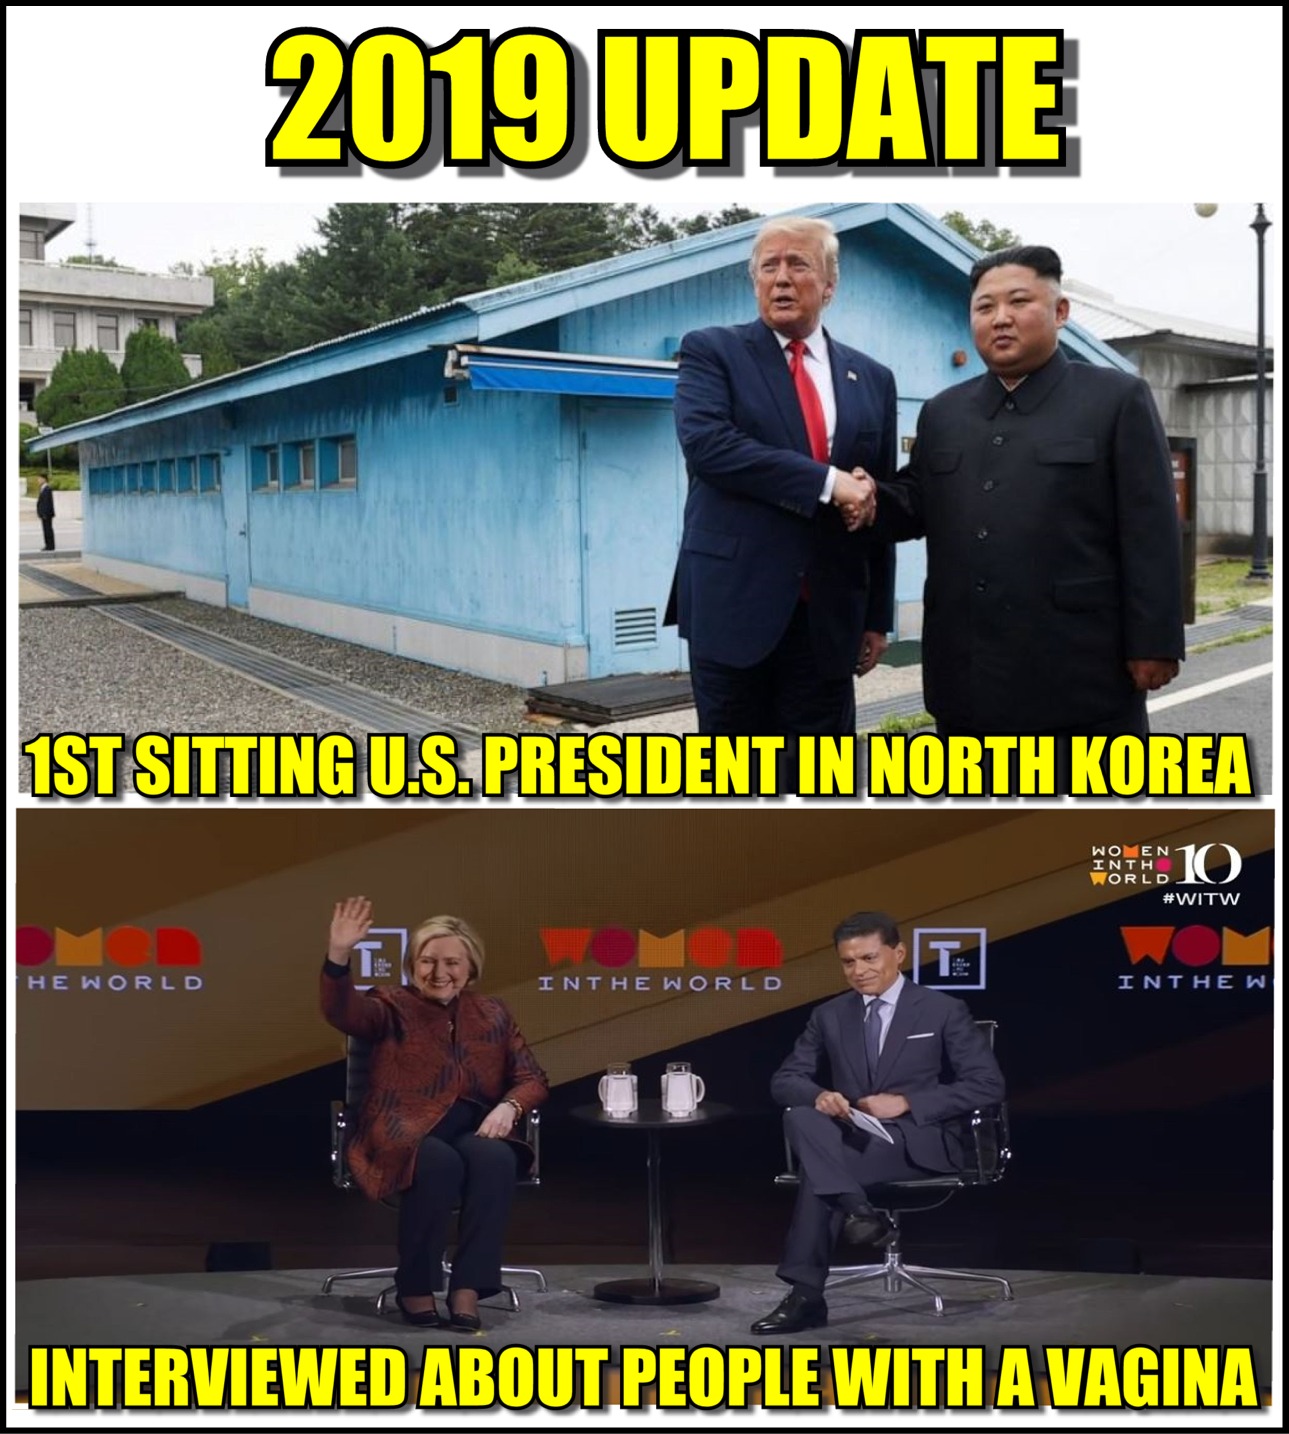 car - 2019 Update 1ST Sitting U.S. President In North Korea Women Inth Vorld He World In The Inthe World Eworlot Inthew Interviewed About People With A Vagina